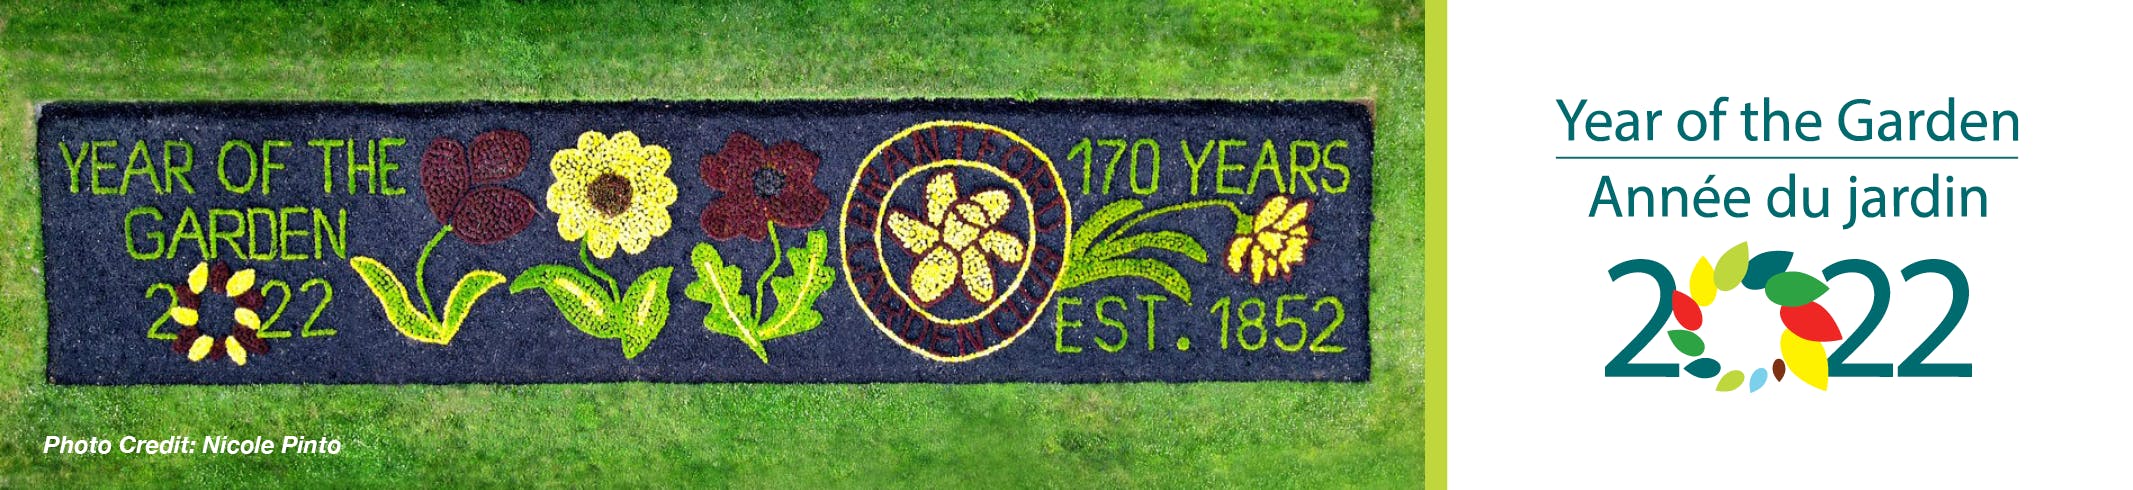 Year of the Garden logo with the Lorne Park garden bed